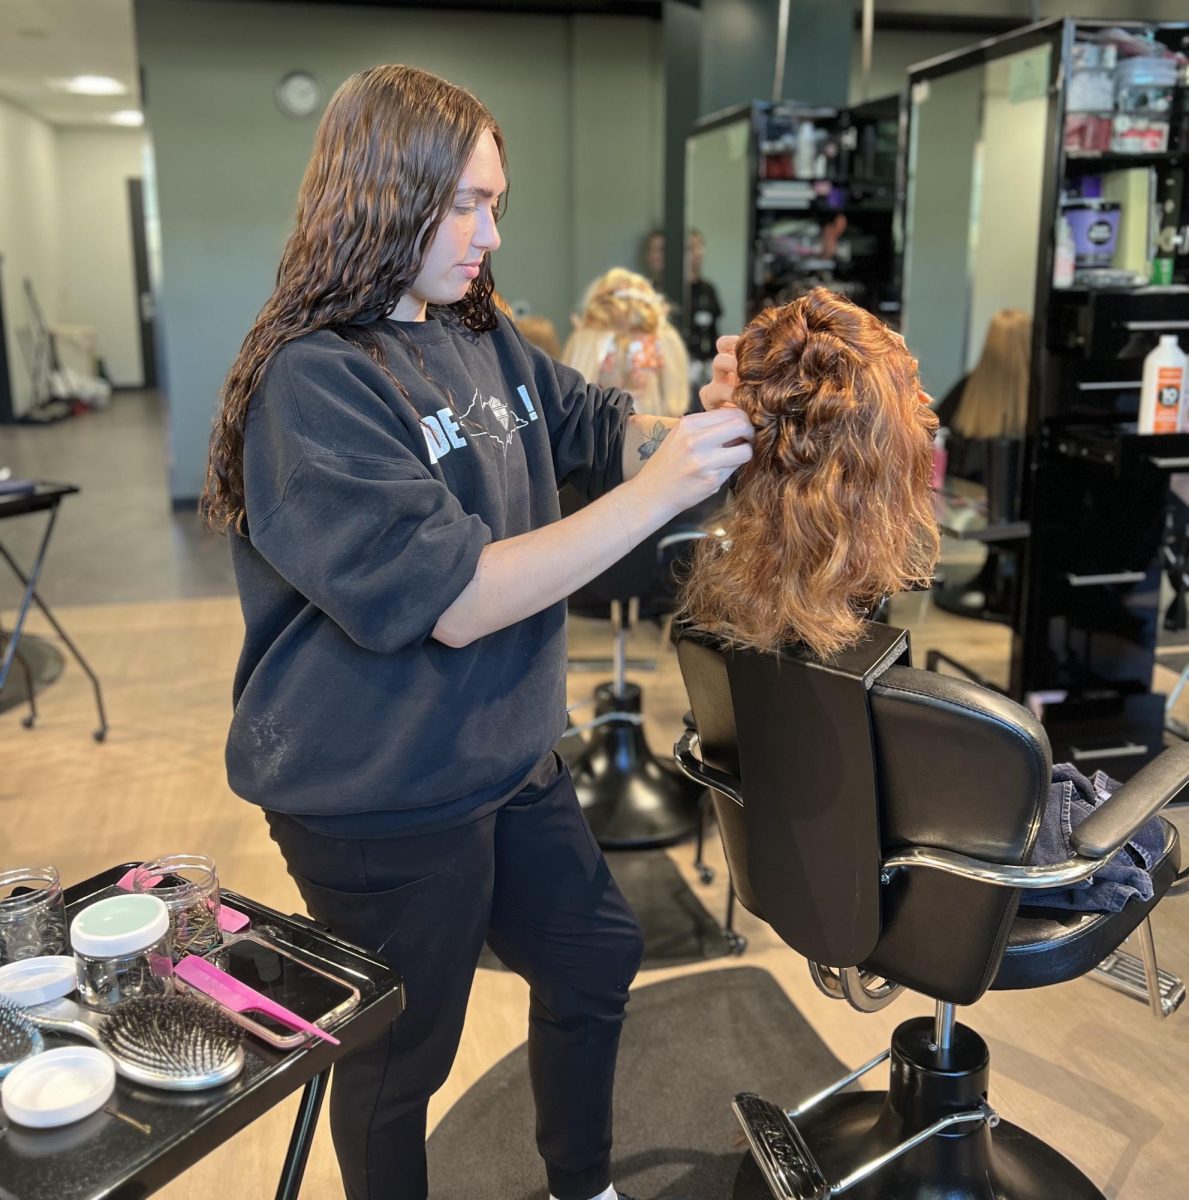 TALENTED STYLING — With steady hands, a student focuses as she works on an intricate hairstyle.